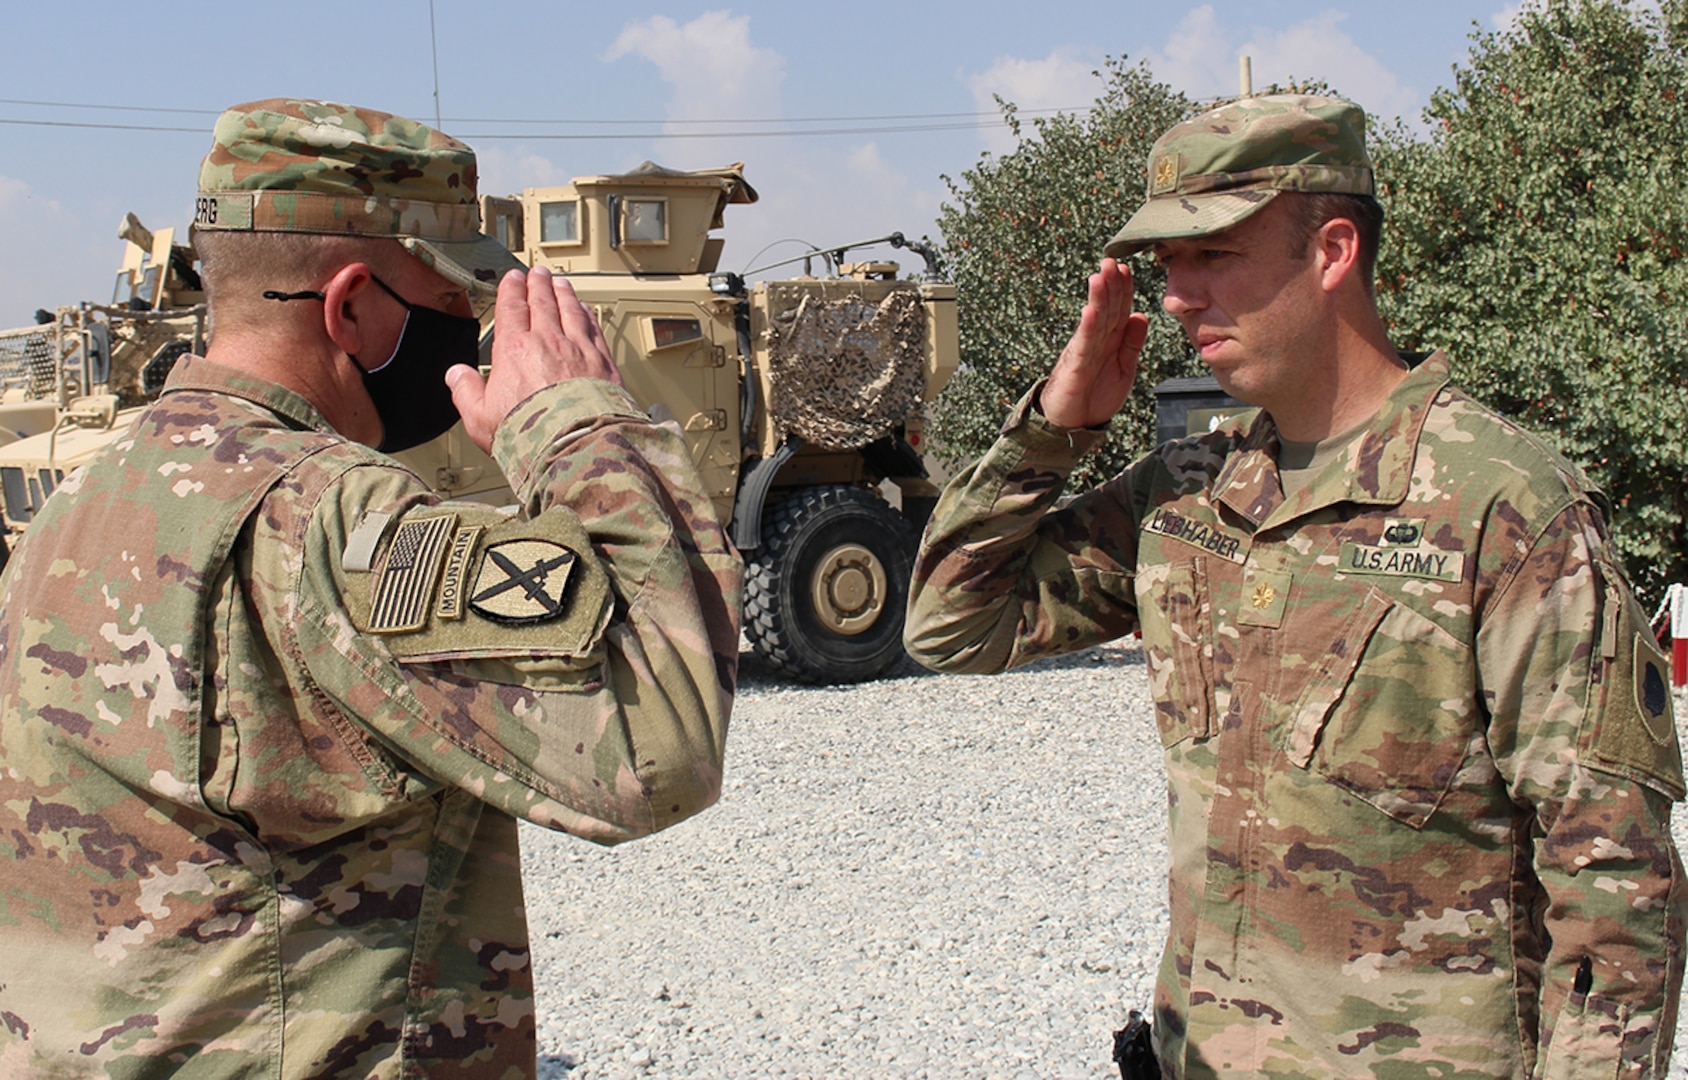 Maj. Scott Liebhaber, of Chicago, salutes Lt. Col. Jason Osberg, of Champaign, Illinois, Commander, Bilateral Embedded Staff Team A25, following the presentation of Osberg’s combat patch.